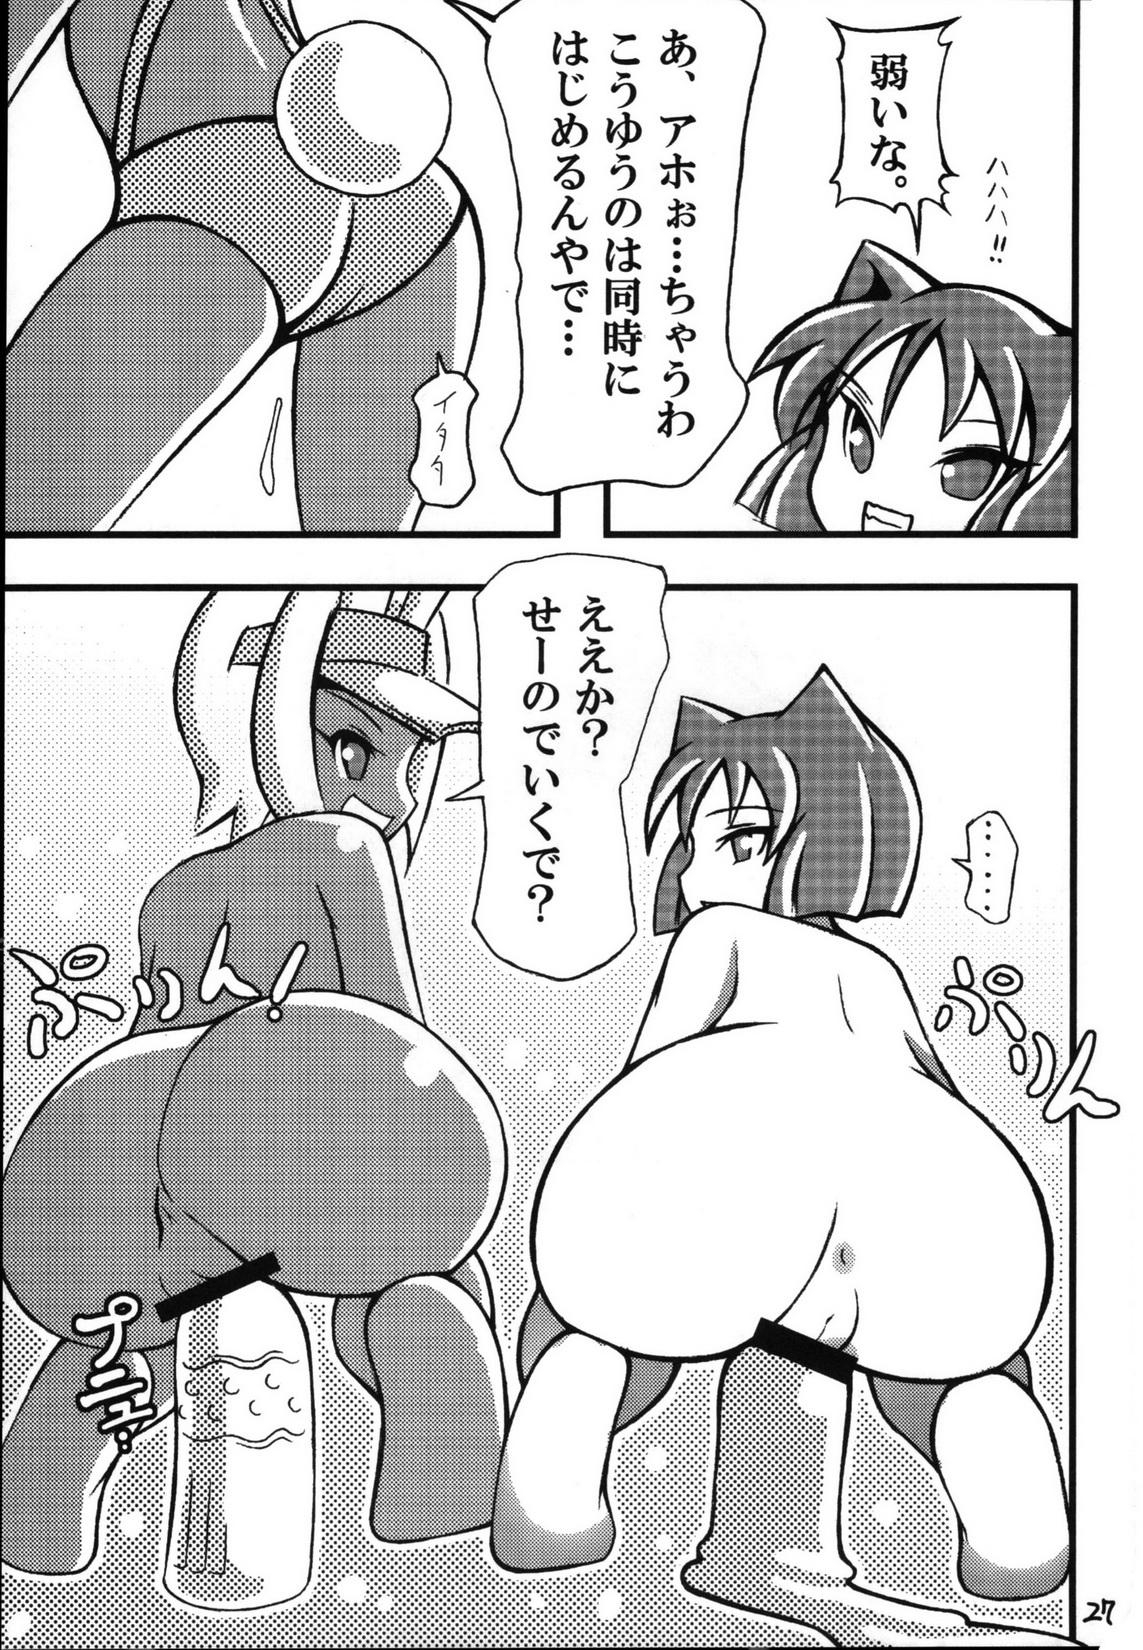 Submissive Suggoi! Arcana Sisters - Arcana heart Hot Milf - Page 28